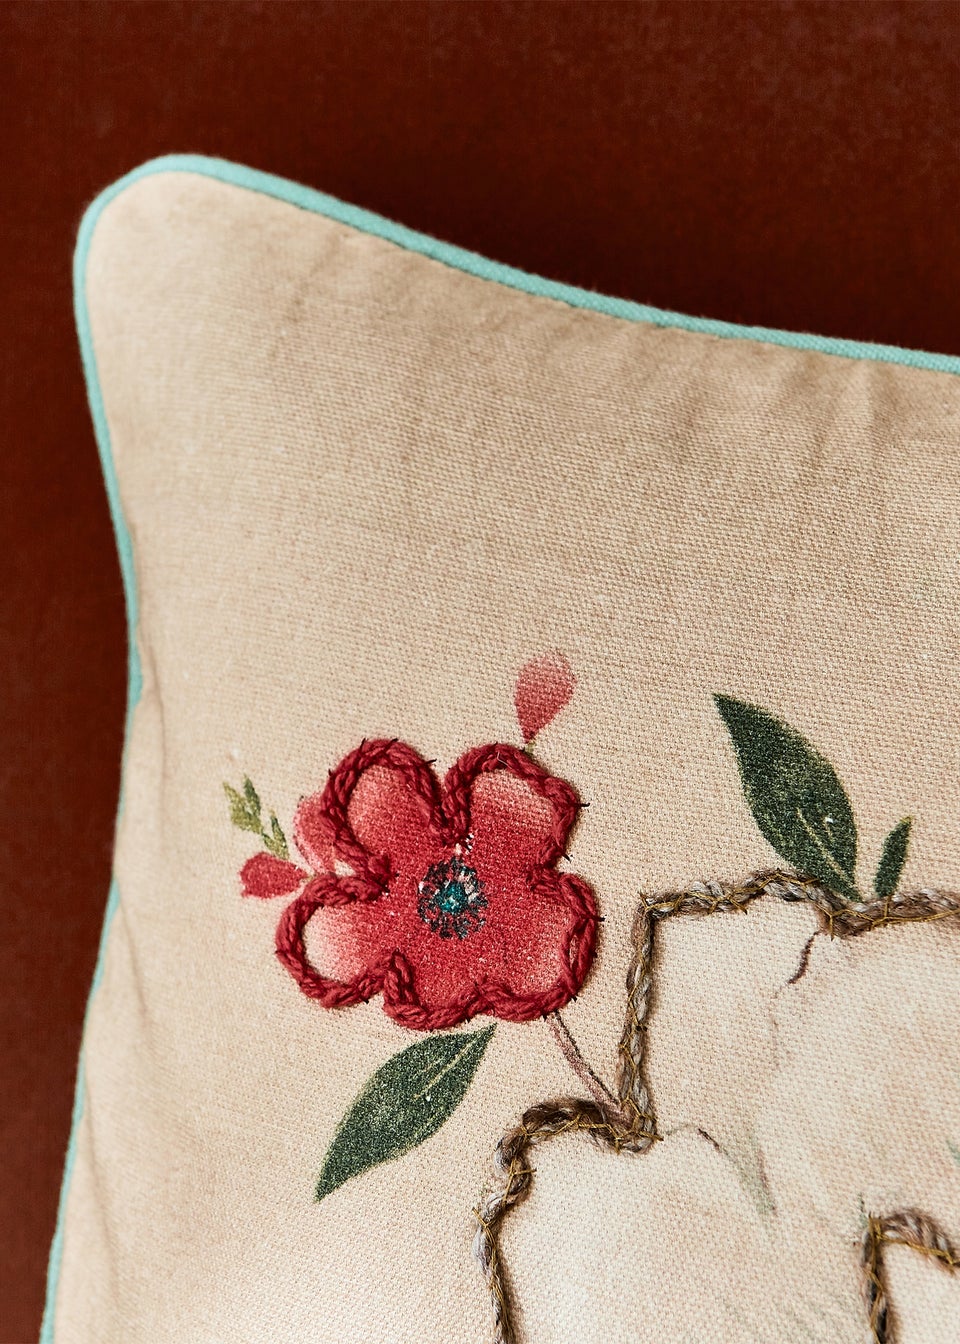 Catherine Lansfield Pippa Embroidered Filled Cushion (45x45cm)